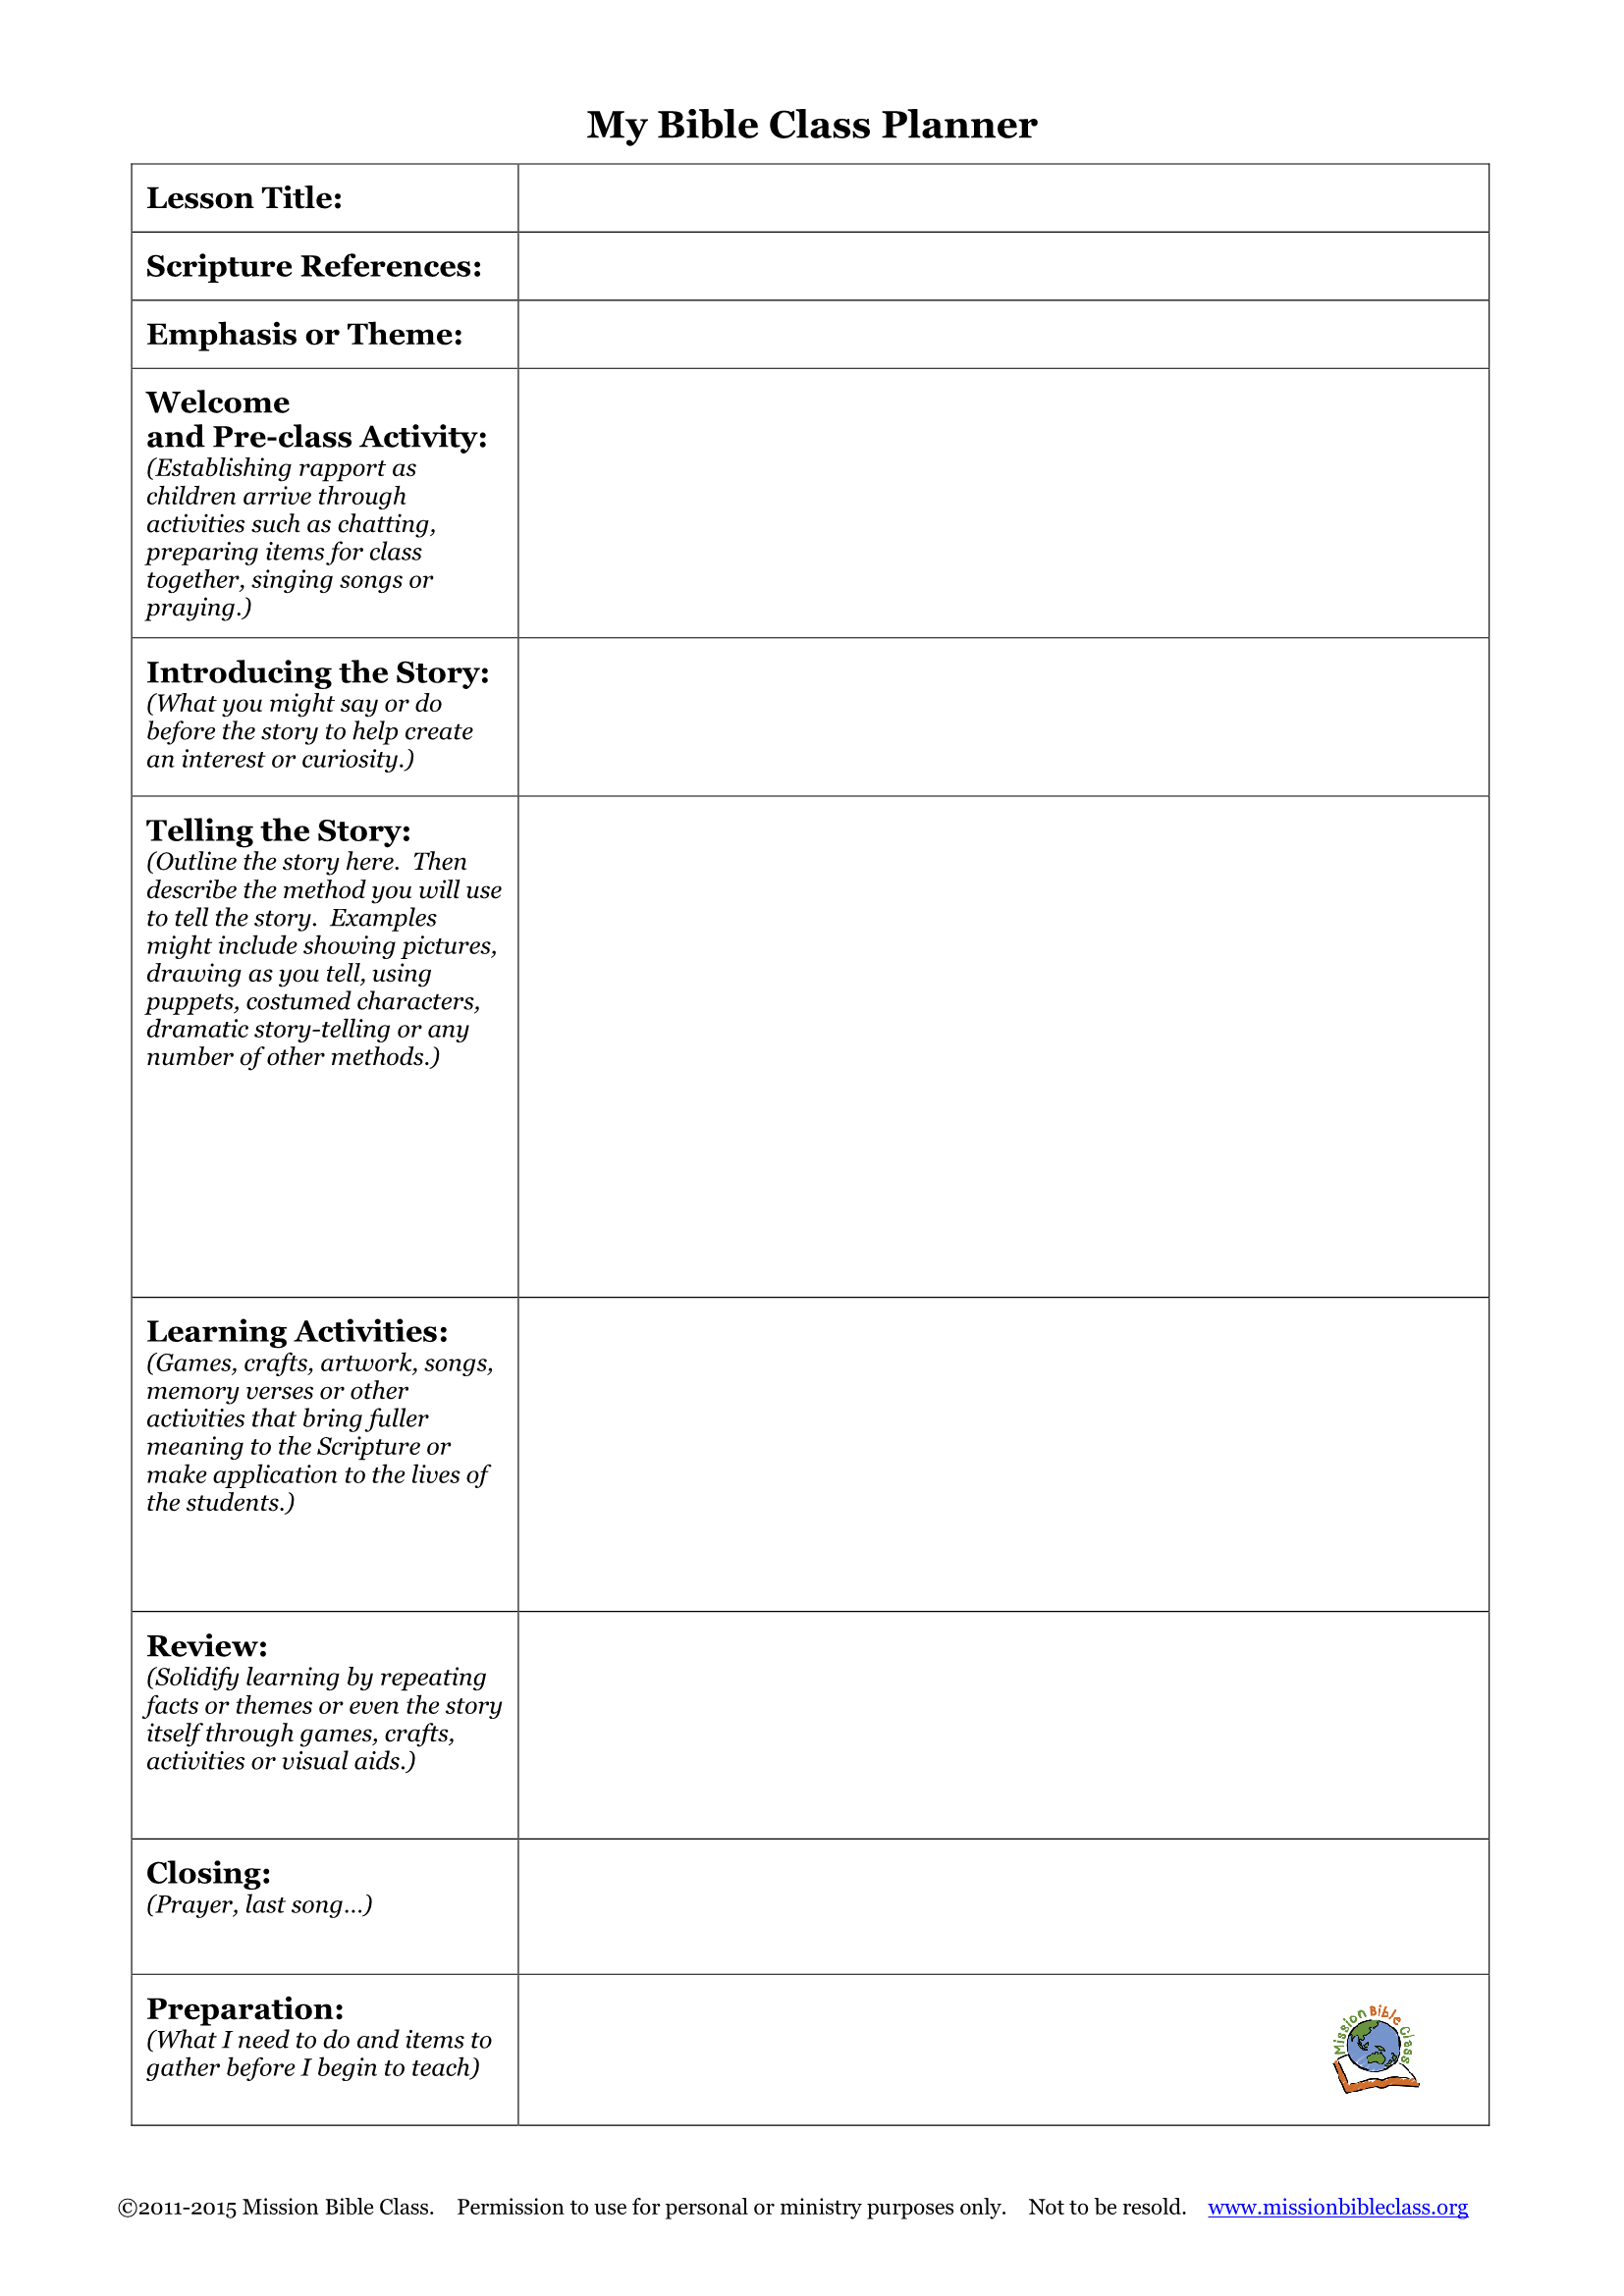 Blank Lesson Plan Templates To Print | Teaching The Bible To For Blank Syllabus Template